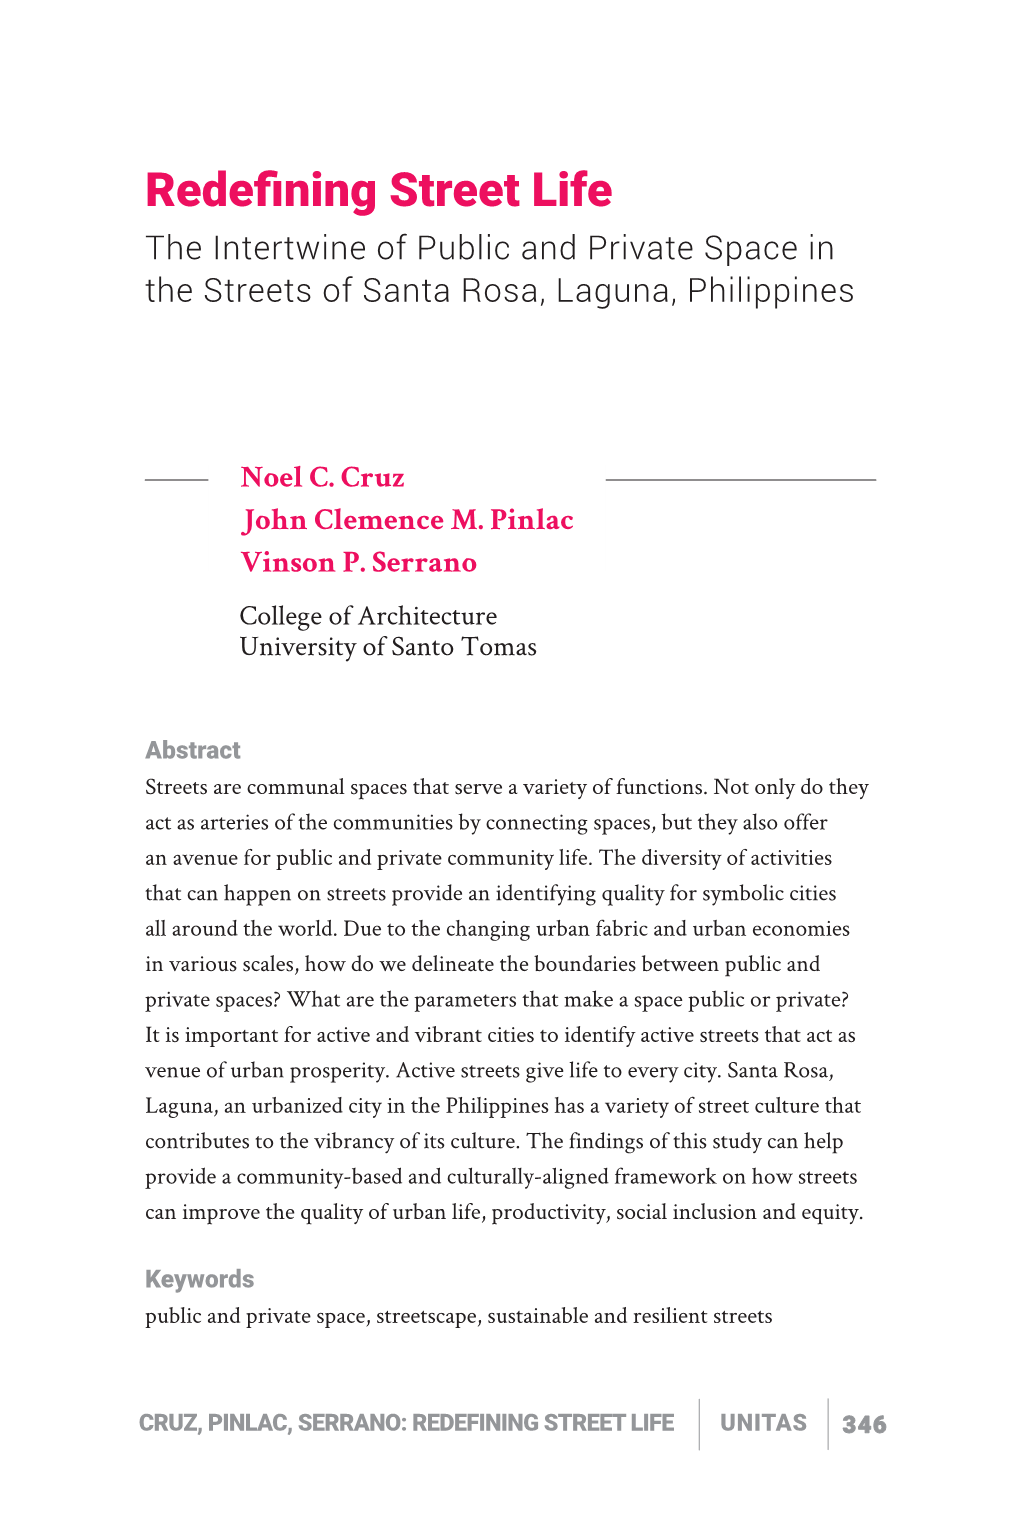 Redefining Street Life the Intertwine of Public and Private Space in the Streets of Santa Rosa, Laguna, Philippines